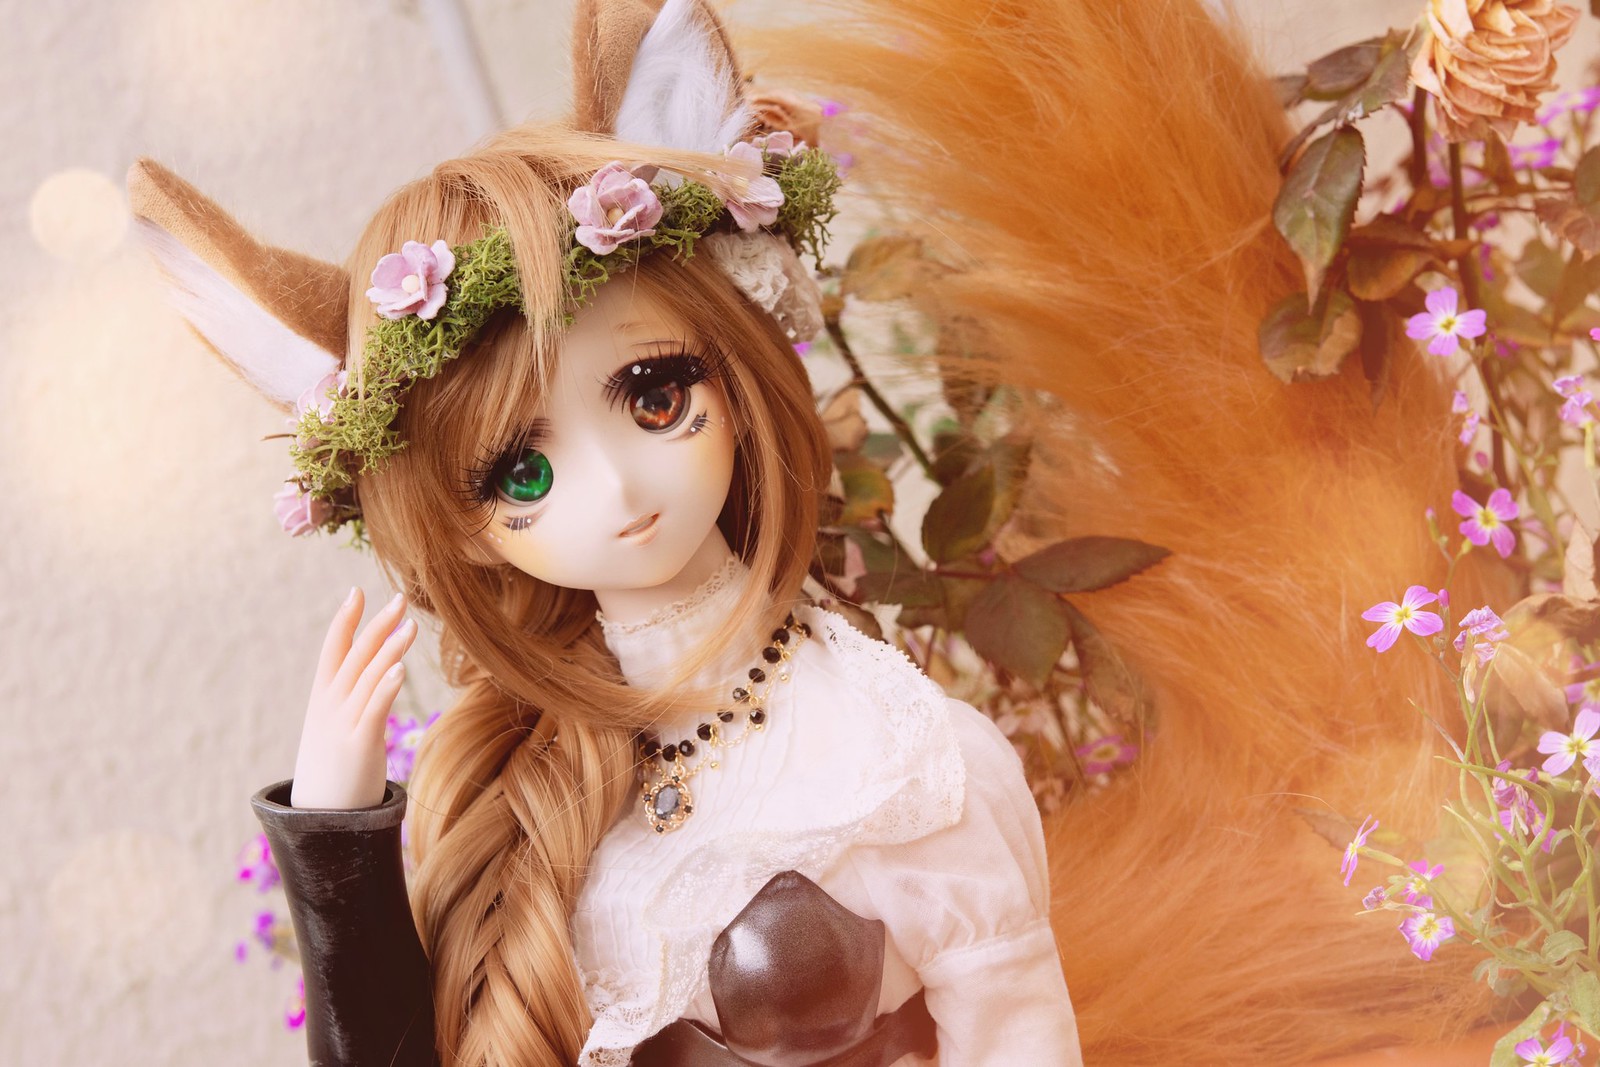 [Dollfie Icon / Dollfie Dream]   ✧* ✧*  Cooking time !  // The Fox Knight  *✧ *✧ - Page 28 52003722511_23f646477c_h